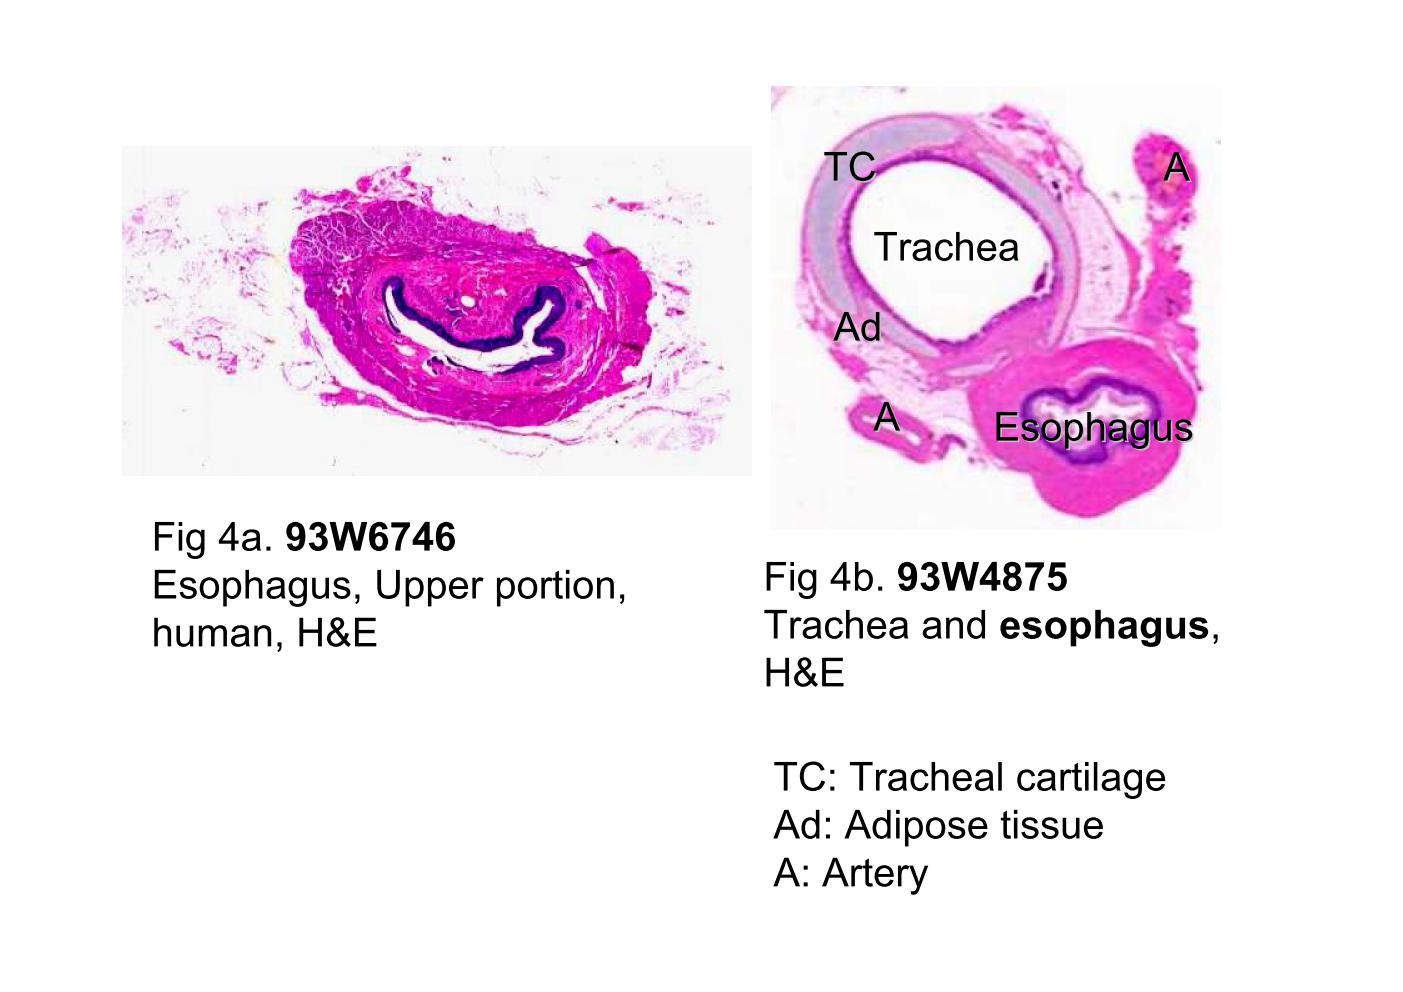 How is the trachea different from the esophagus?